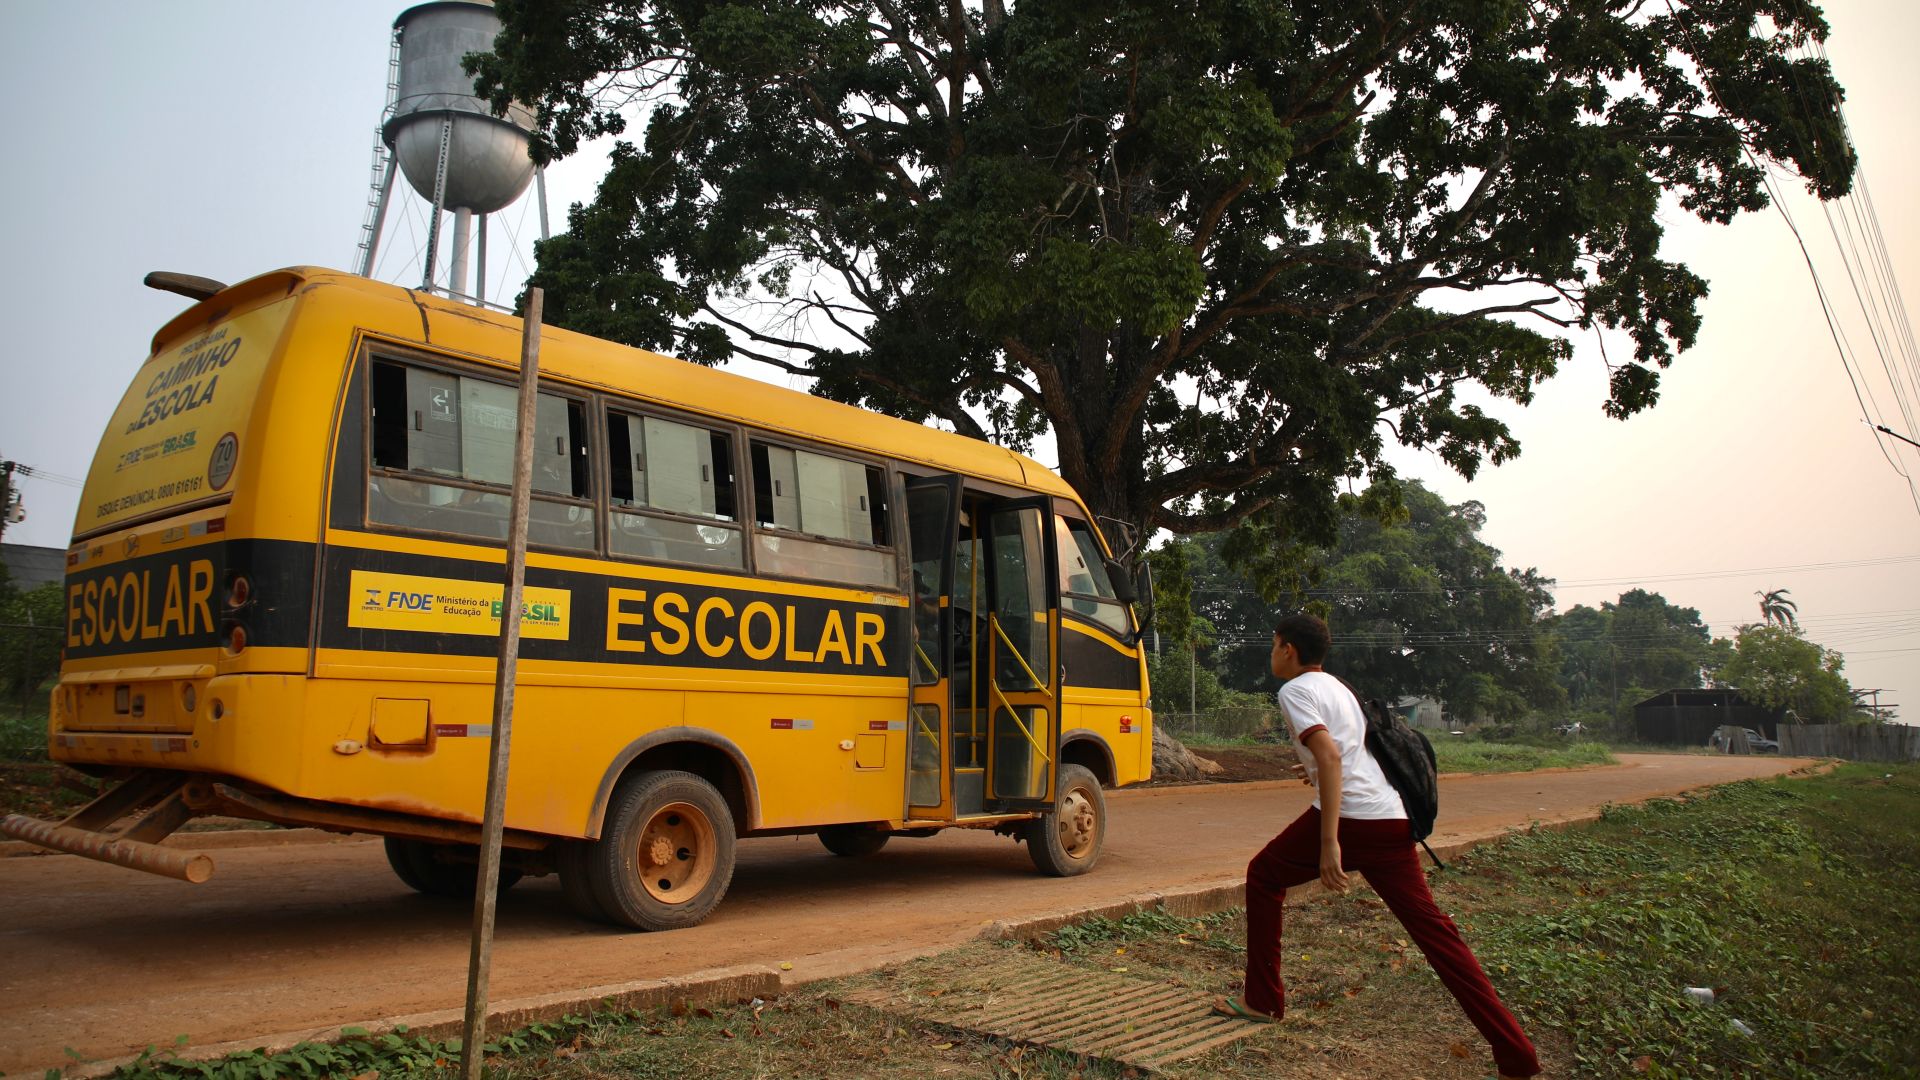 A young student takes wide strides to reach an orange school bus waiting for him on a dirt road.